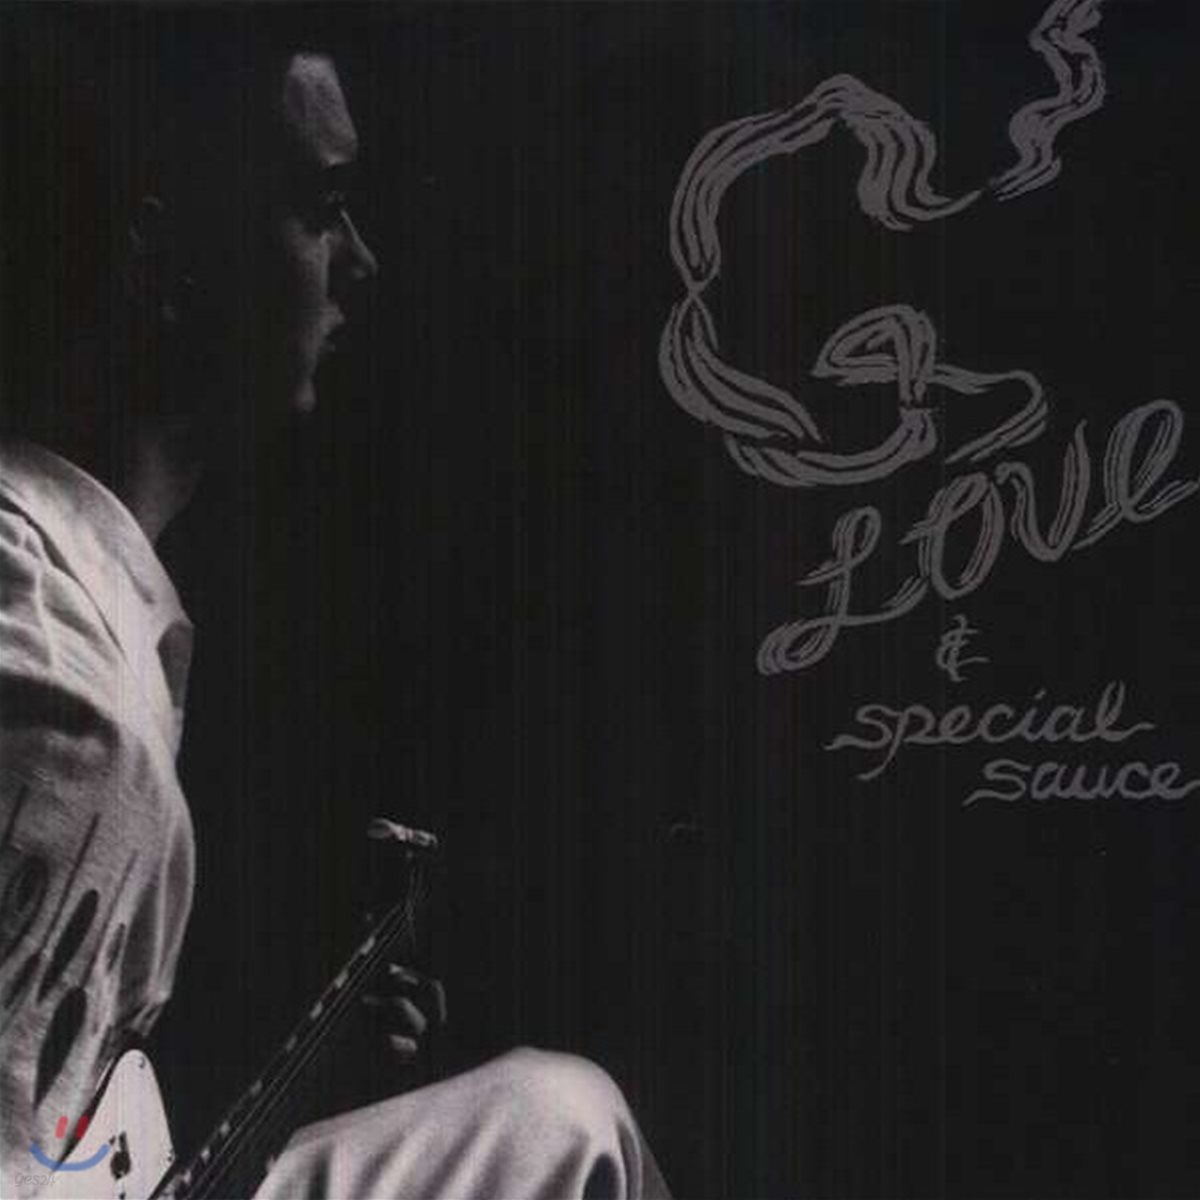 G. Love &amp; The Special Sauce (지 러브 앤 스폐셜 소스) - G. Love &amp; The Special Sauce [LP]